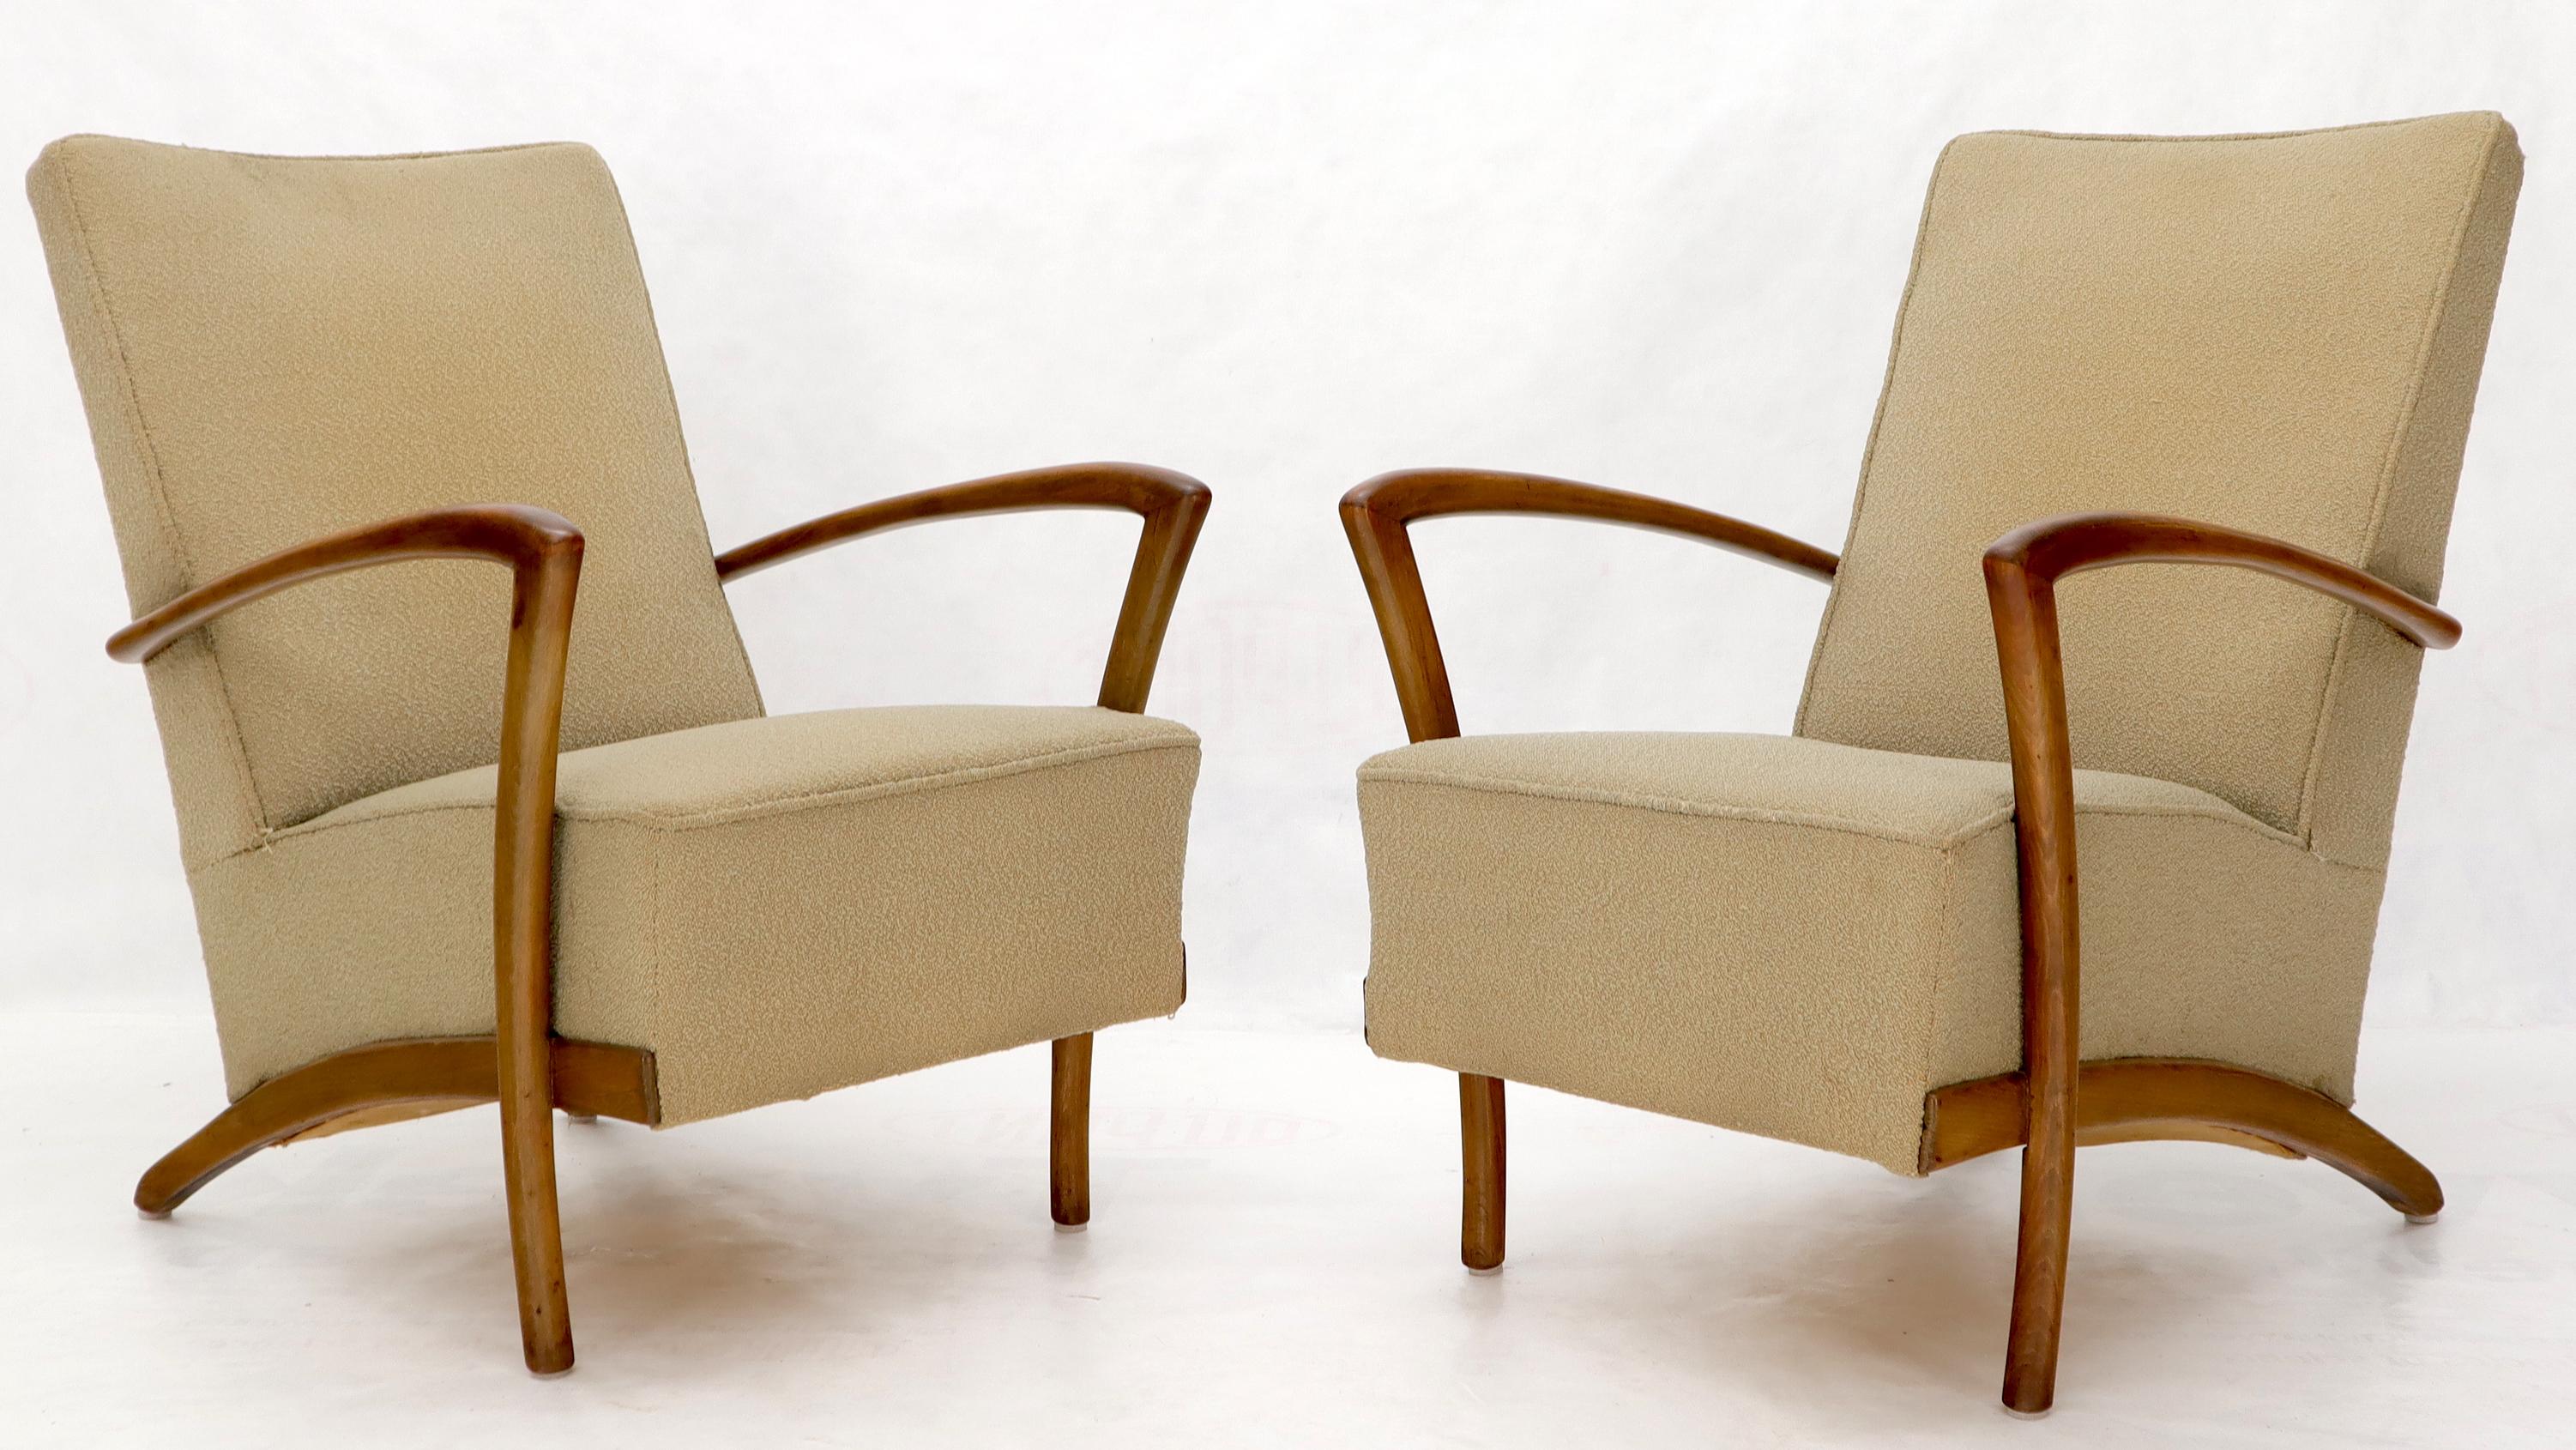 Pair of Italian Mid-Century Modern wooden arms springs loaded arm lounge chairs.